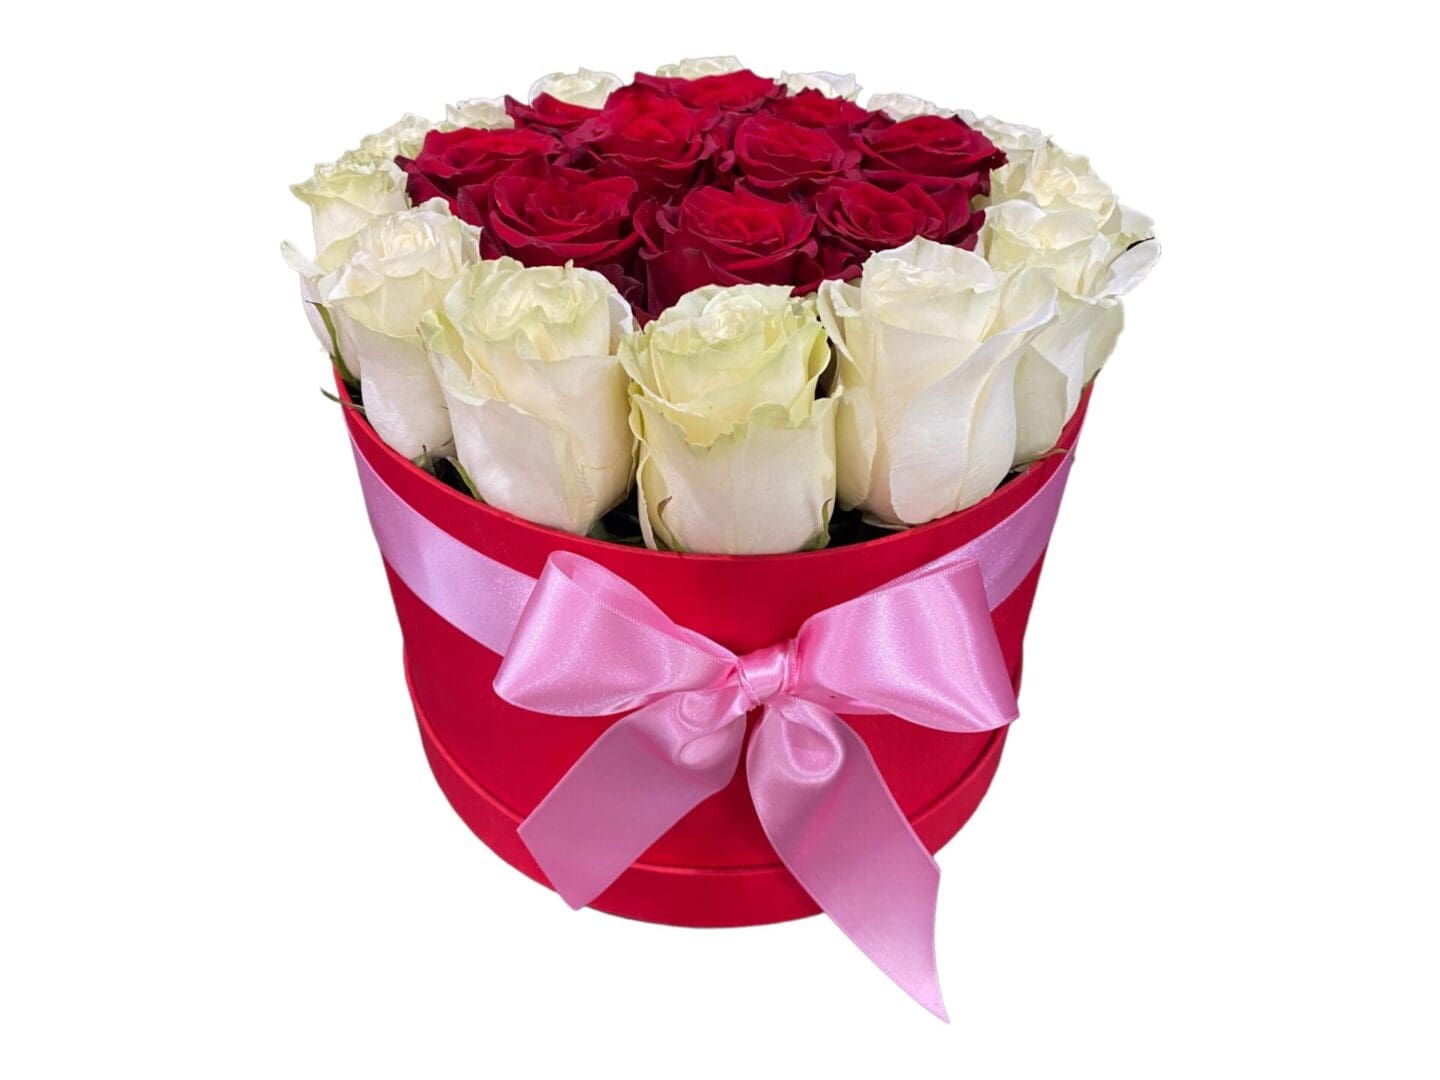 Red Hat Box with White and Red Roses